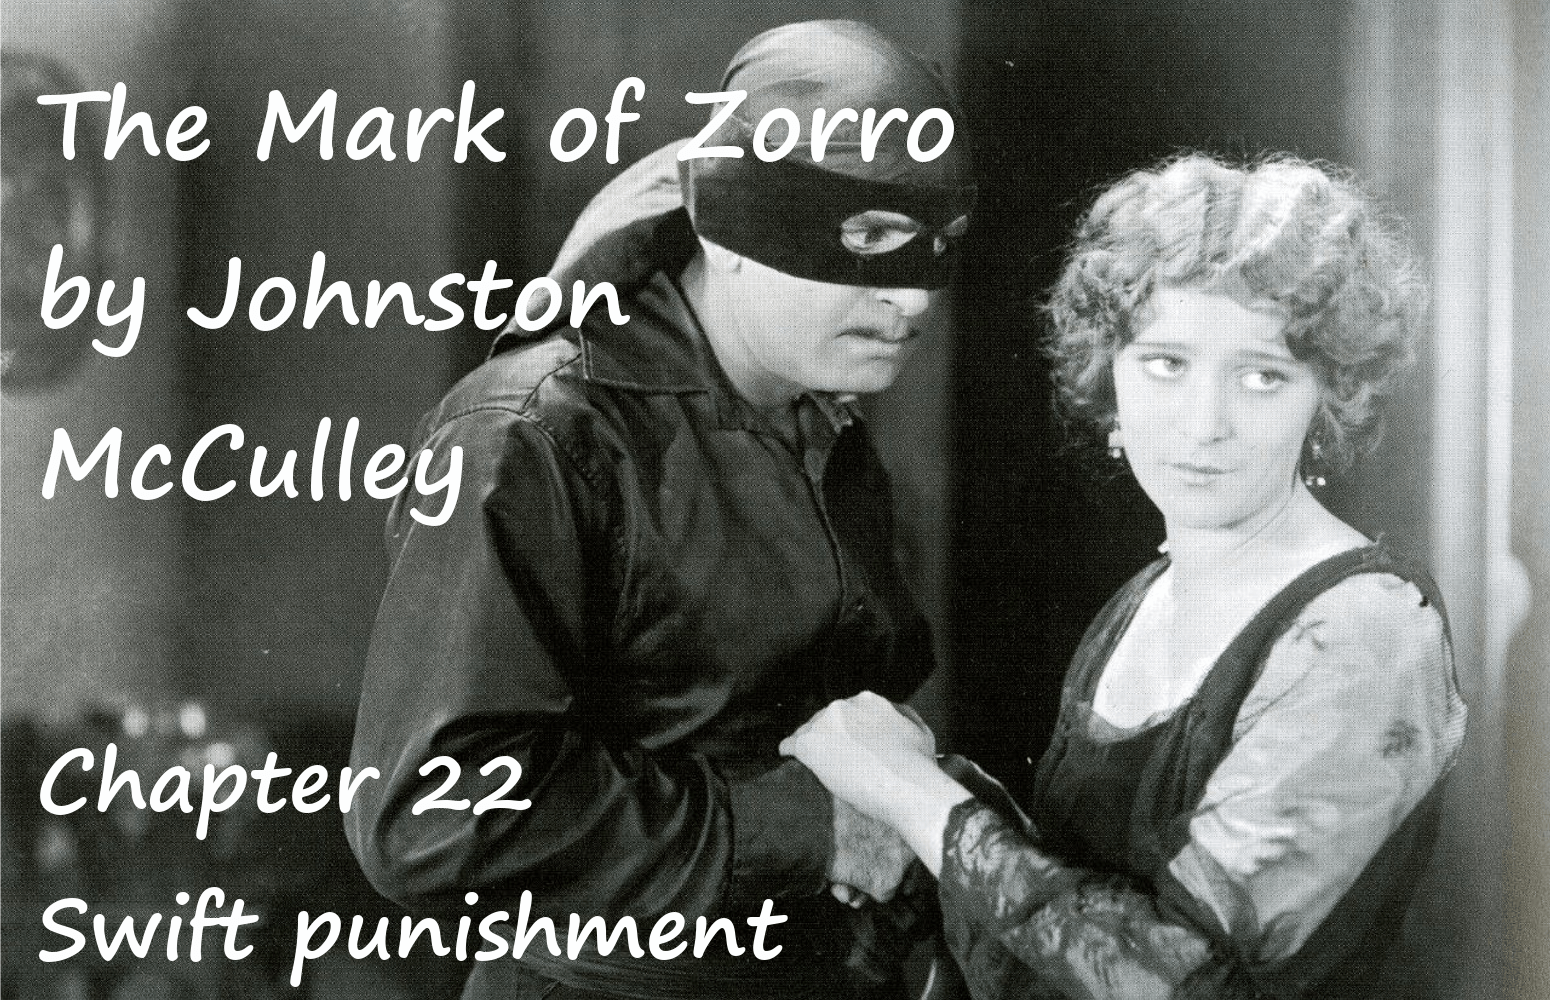 The Mark of Zorro chapter 22 Swift punishment by Johnston McCulley